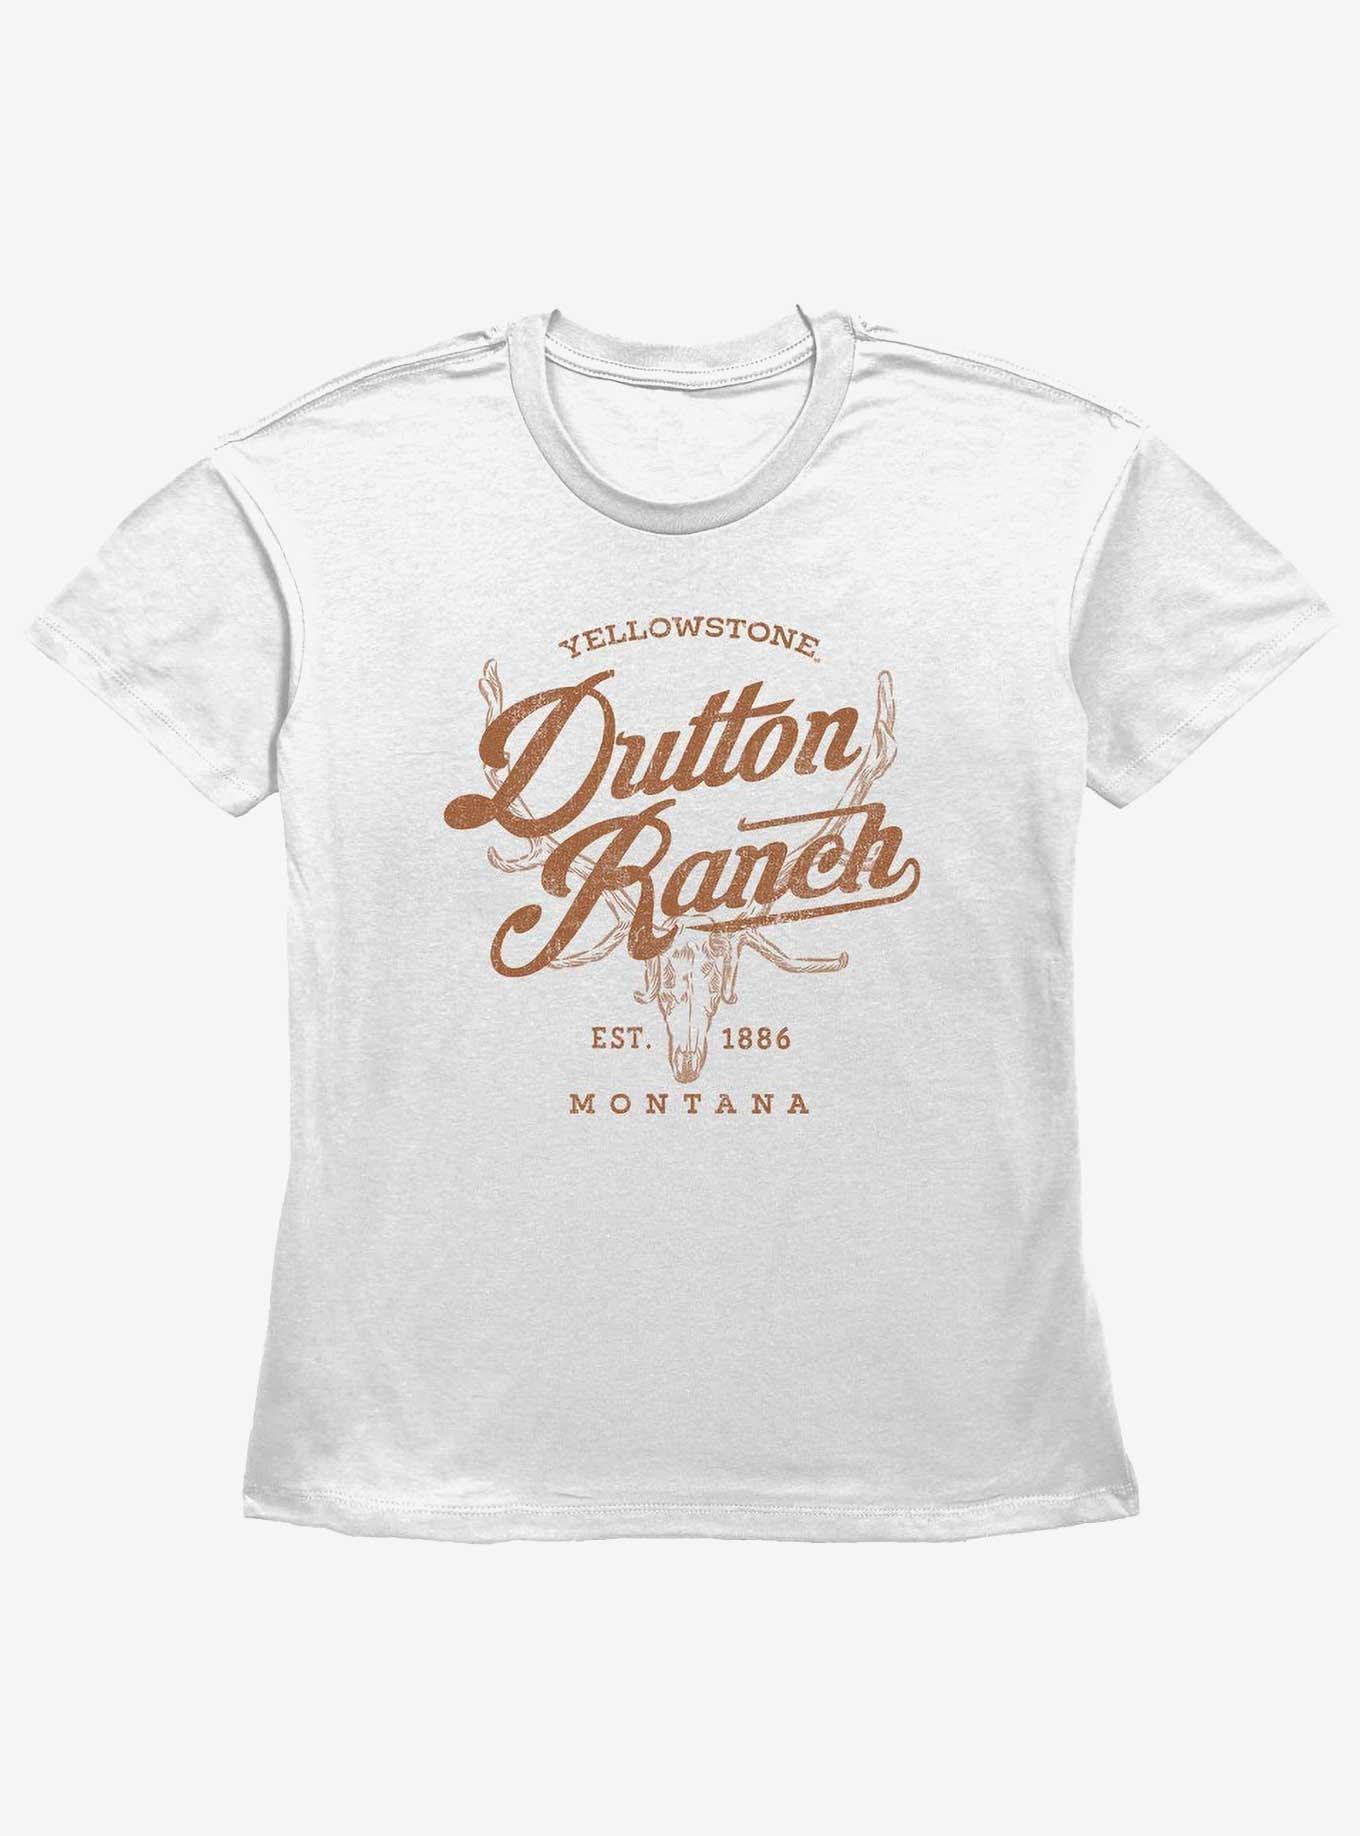 Yellowstone Dutton Ranch Montana Womens Straight Fit T-Shirt, WHITE, hi-res